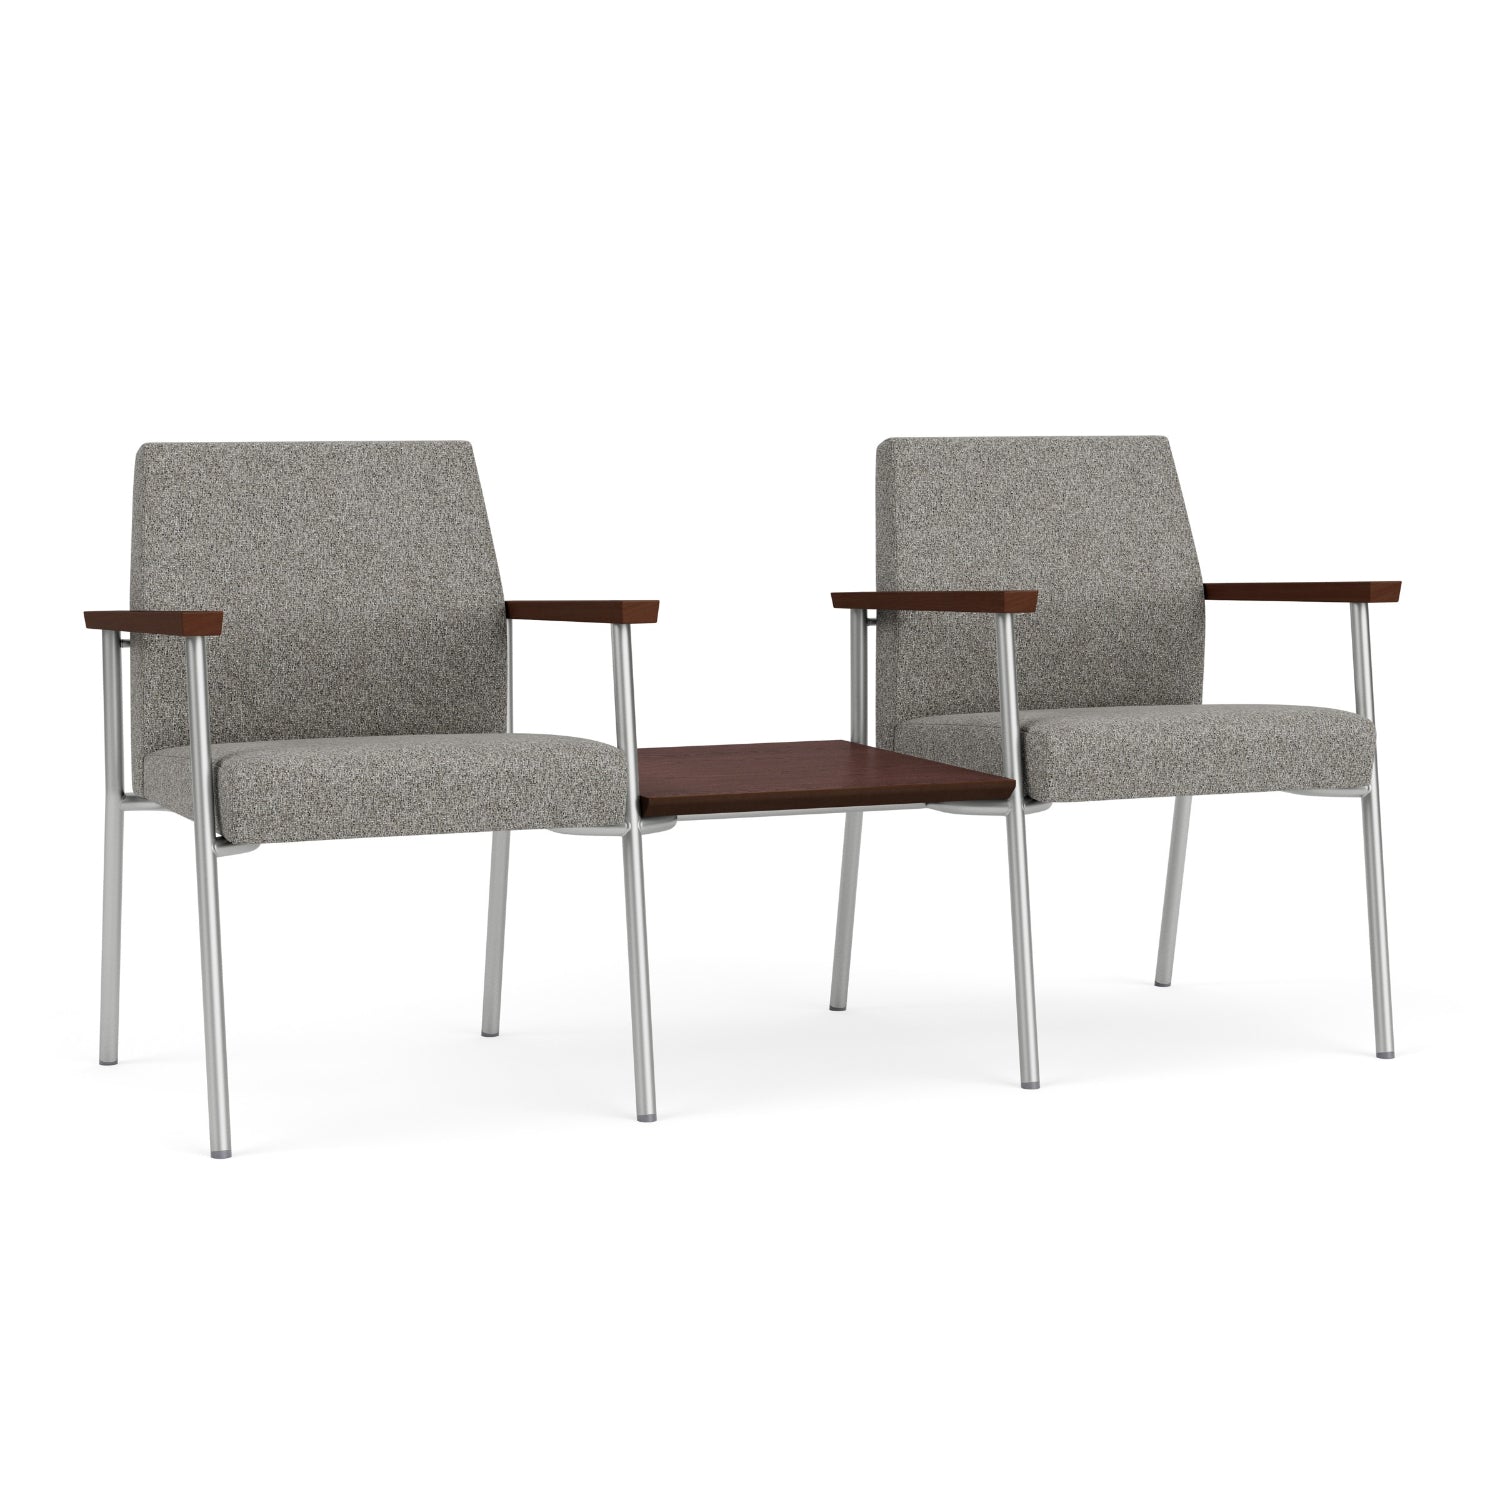 Mystic Guest Collection Reception Seating, 2 Chairs with Connecting Center Table, Standard Fabric Upholstery, FREE SHIPPING